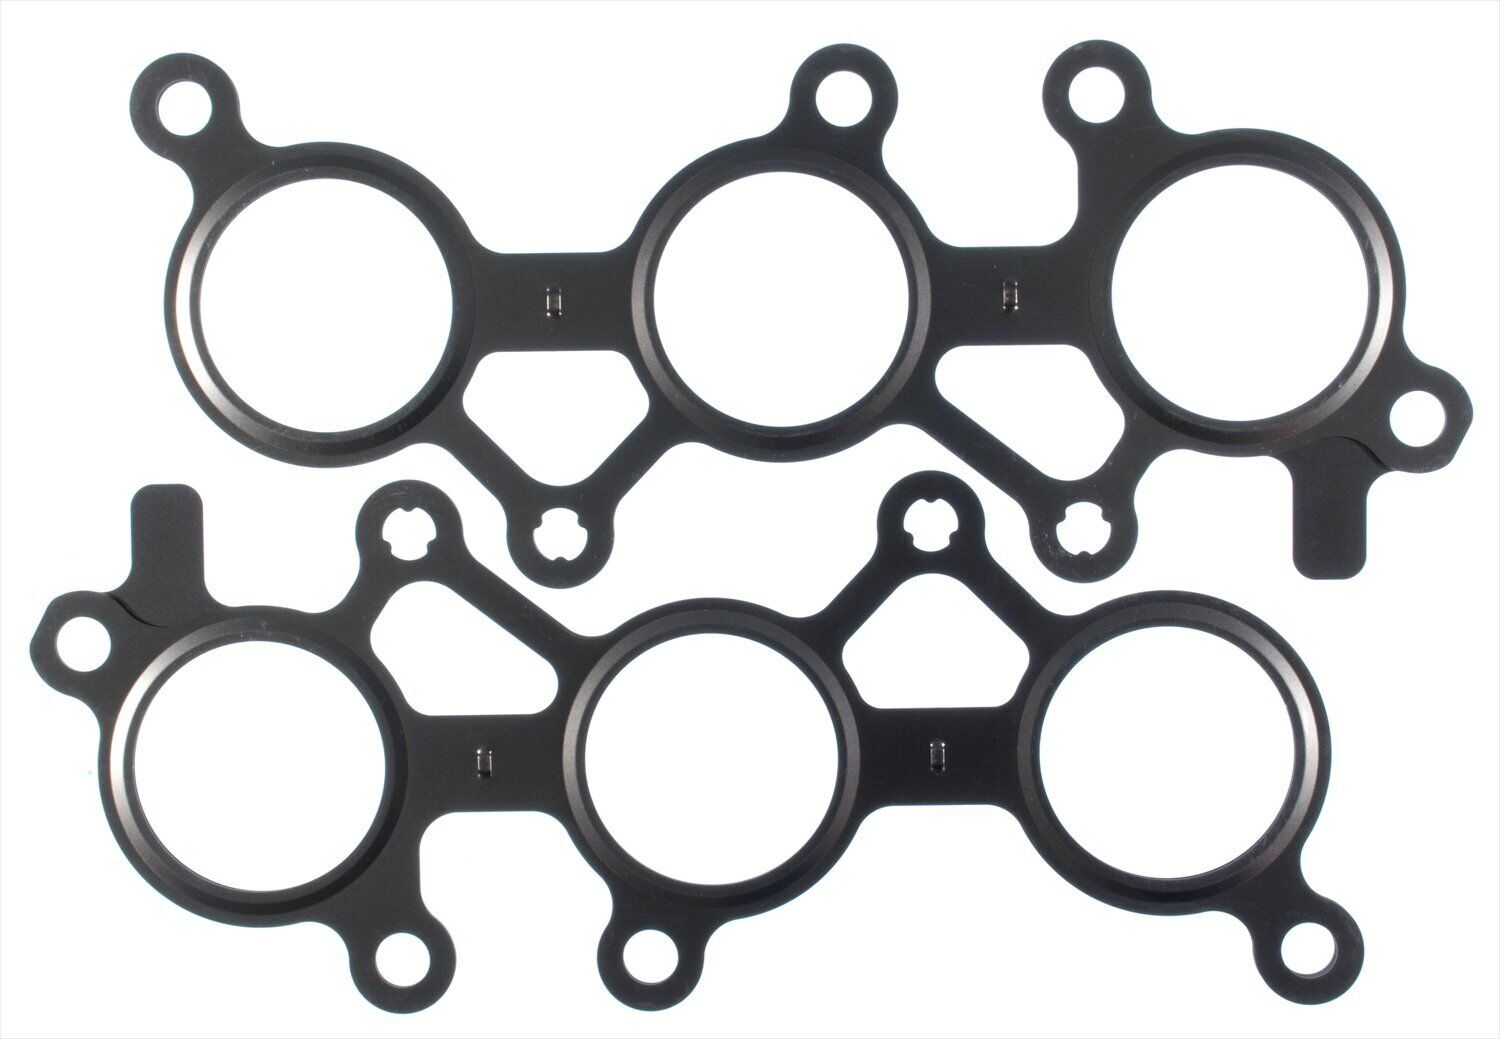 Exhaust Manifold Gasket Set for Evora, ES350, Avalon, GS450h, IS300+More MS19722